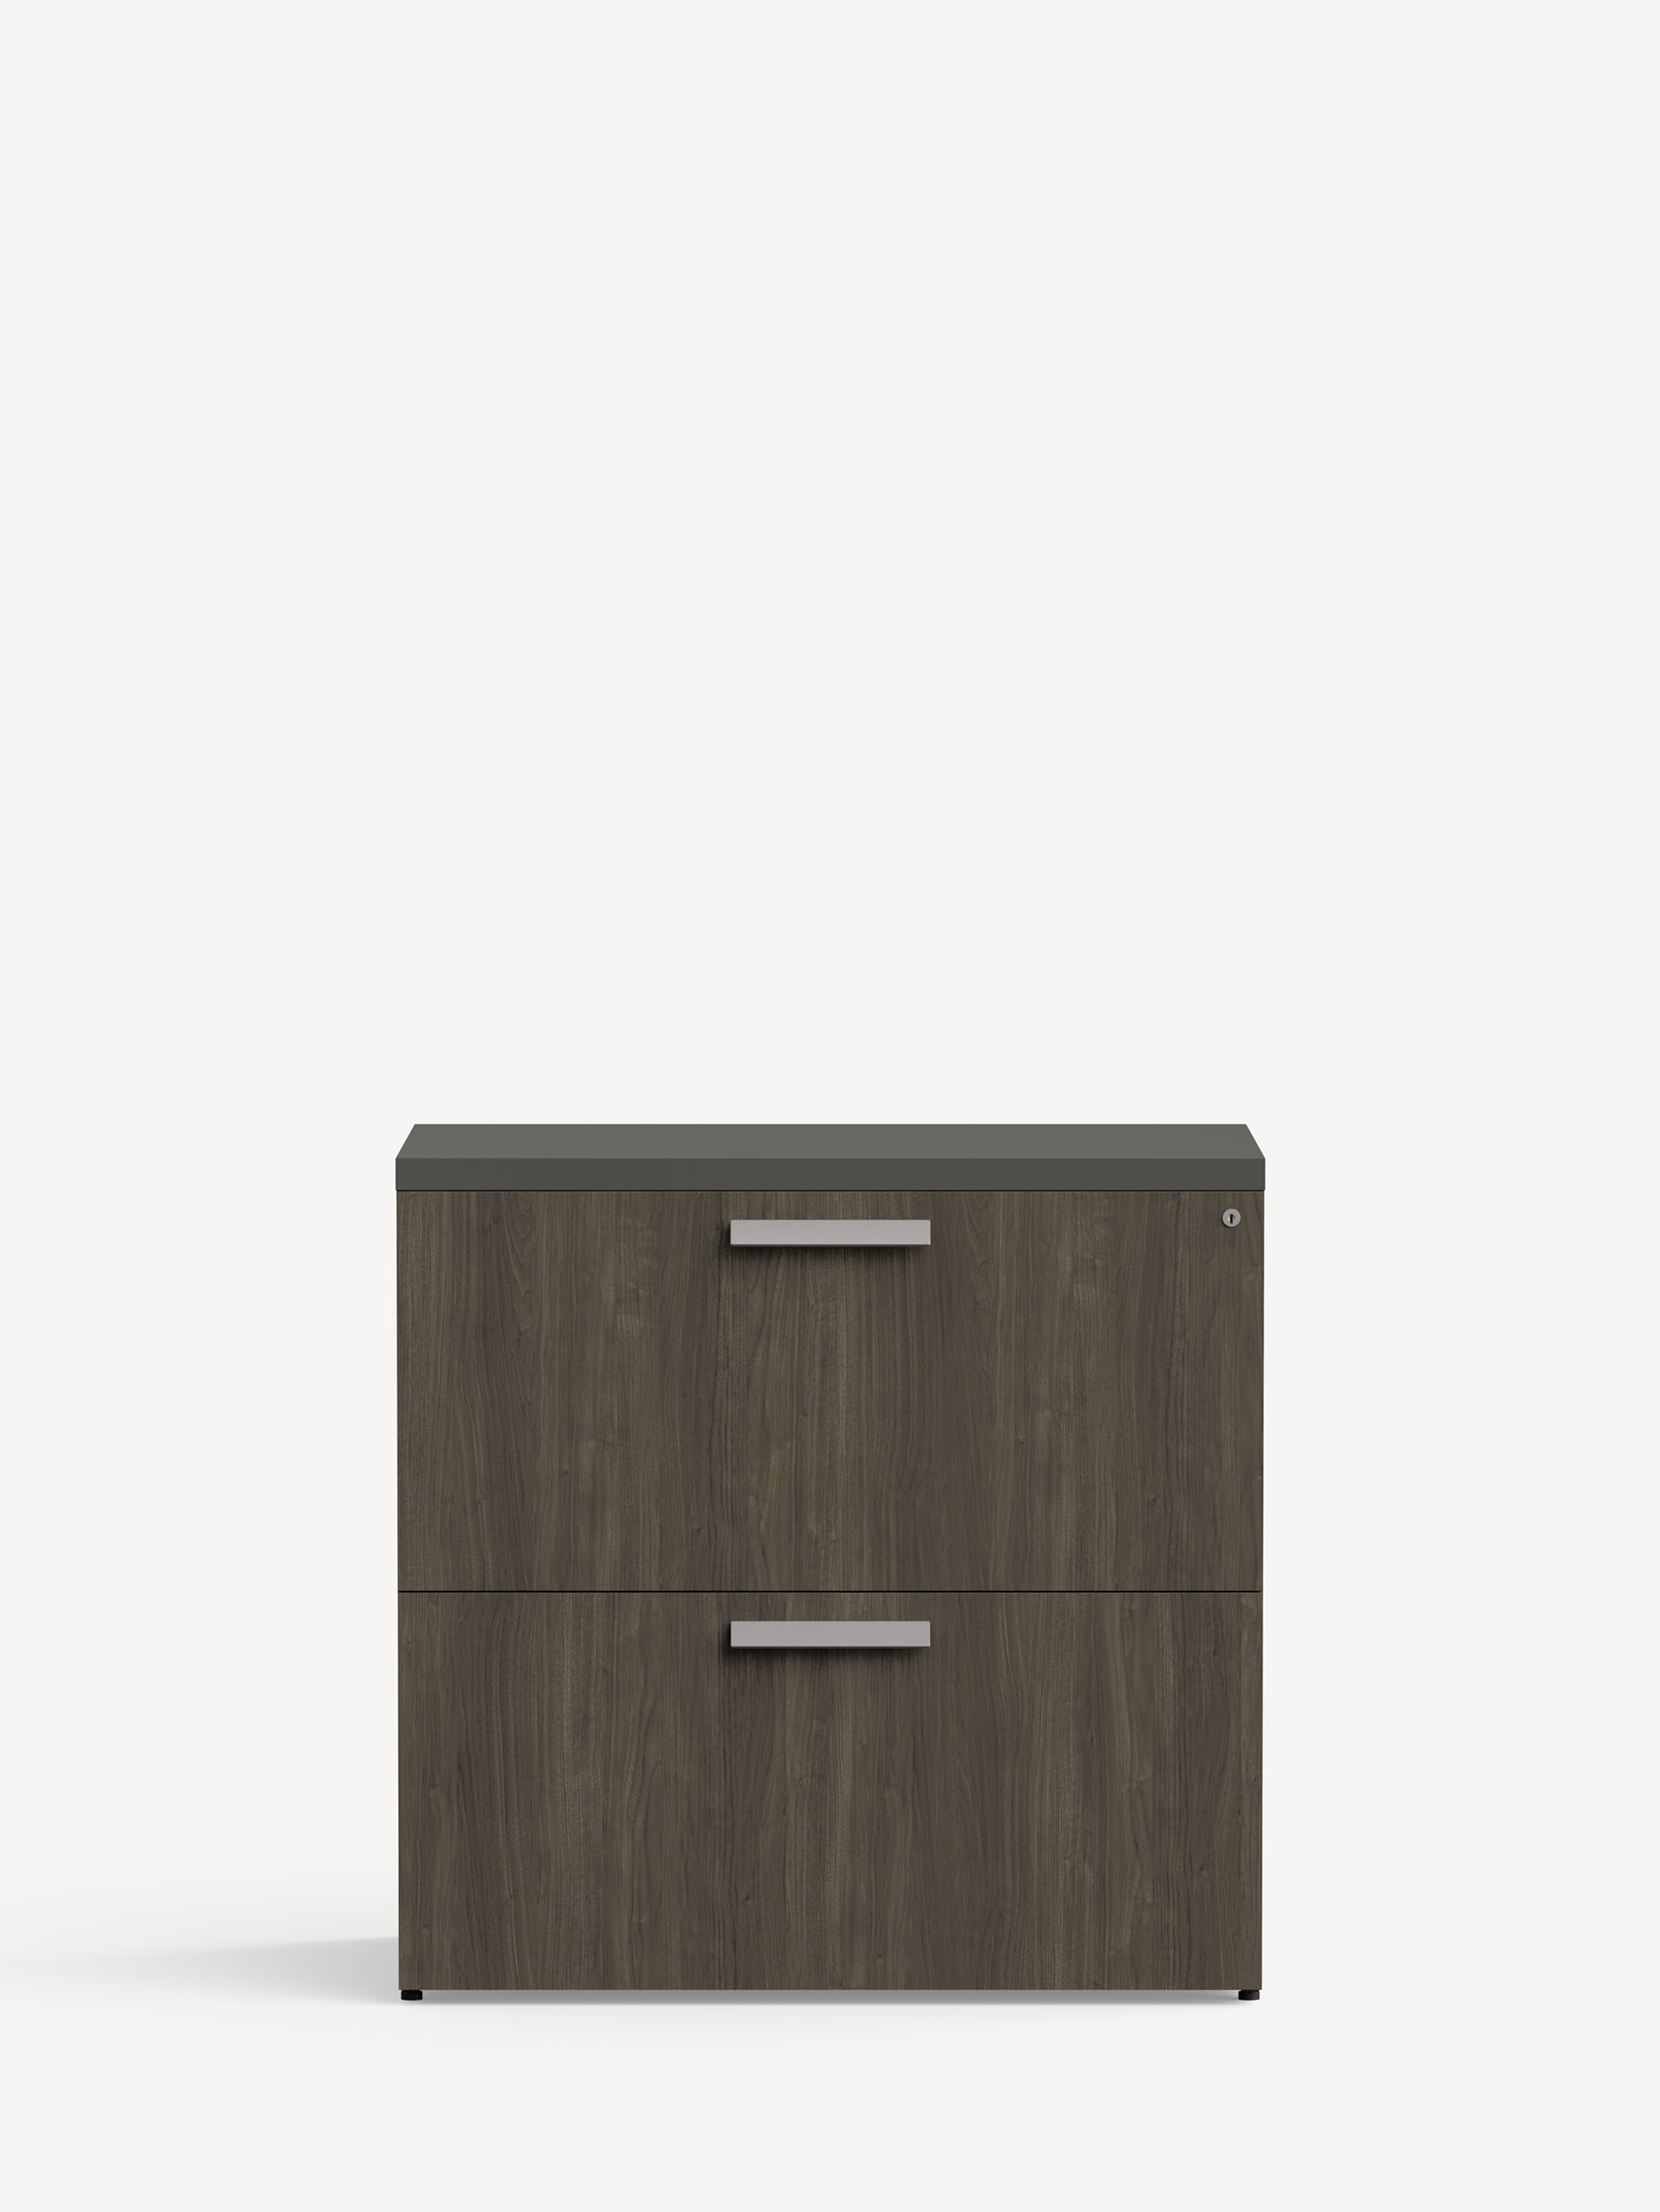 Approach Lateral File Unit in brownish grey wood with two later file drawers, dark grey top and silver handles.